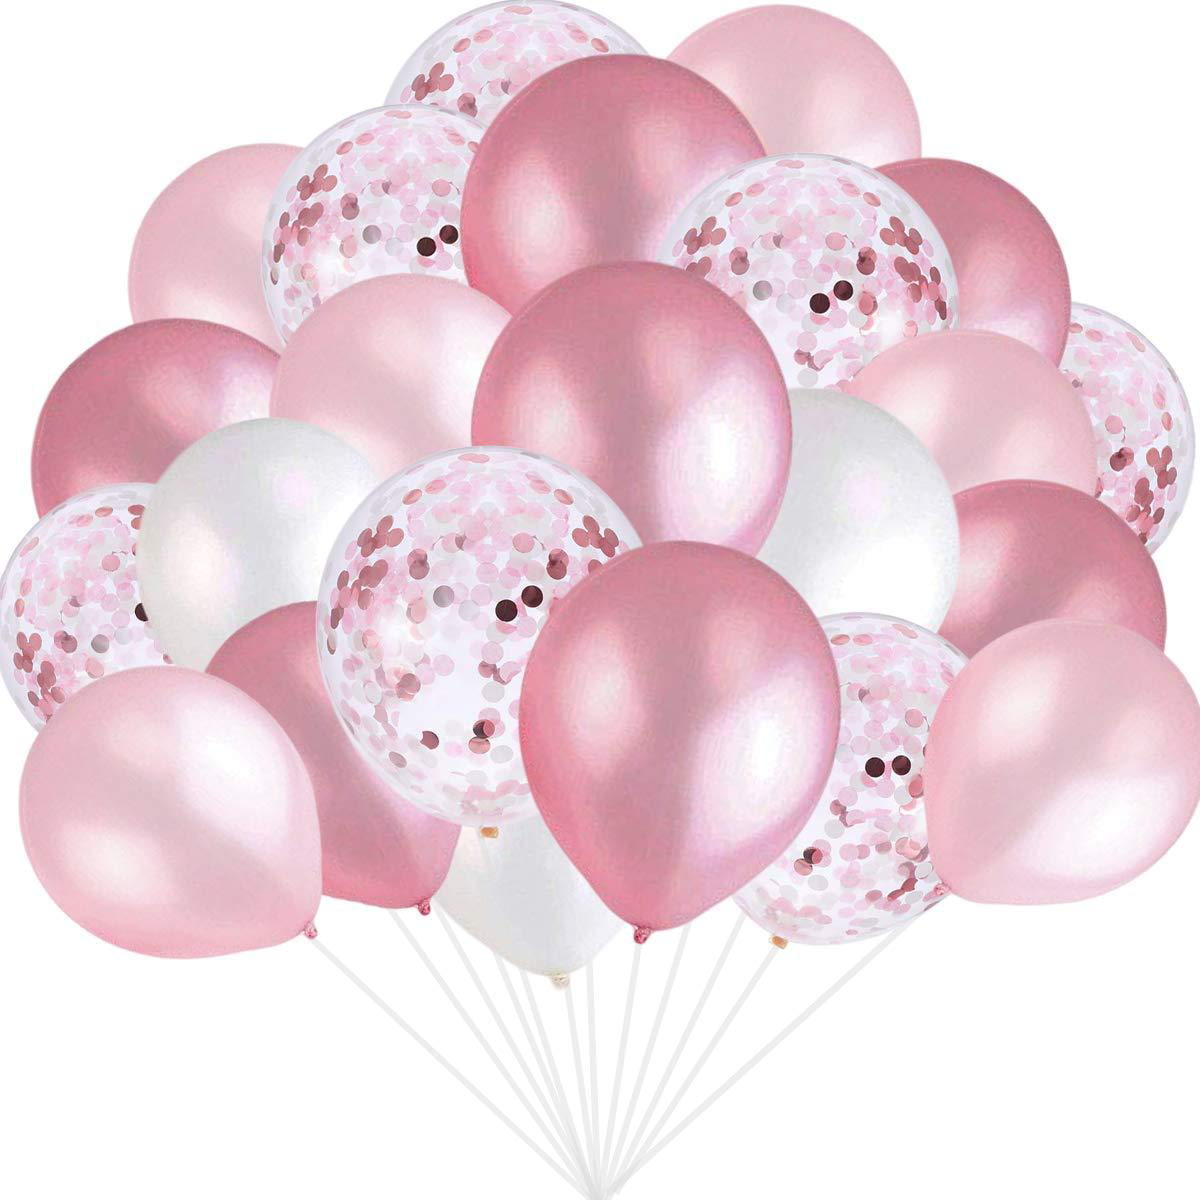  pink  and white  balloons  pink  confetti balloons  white  